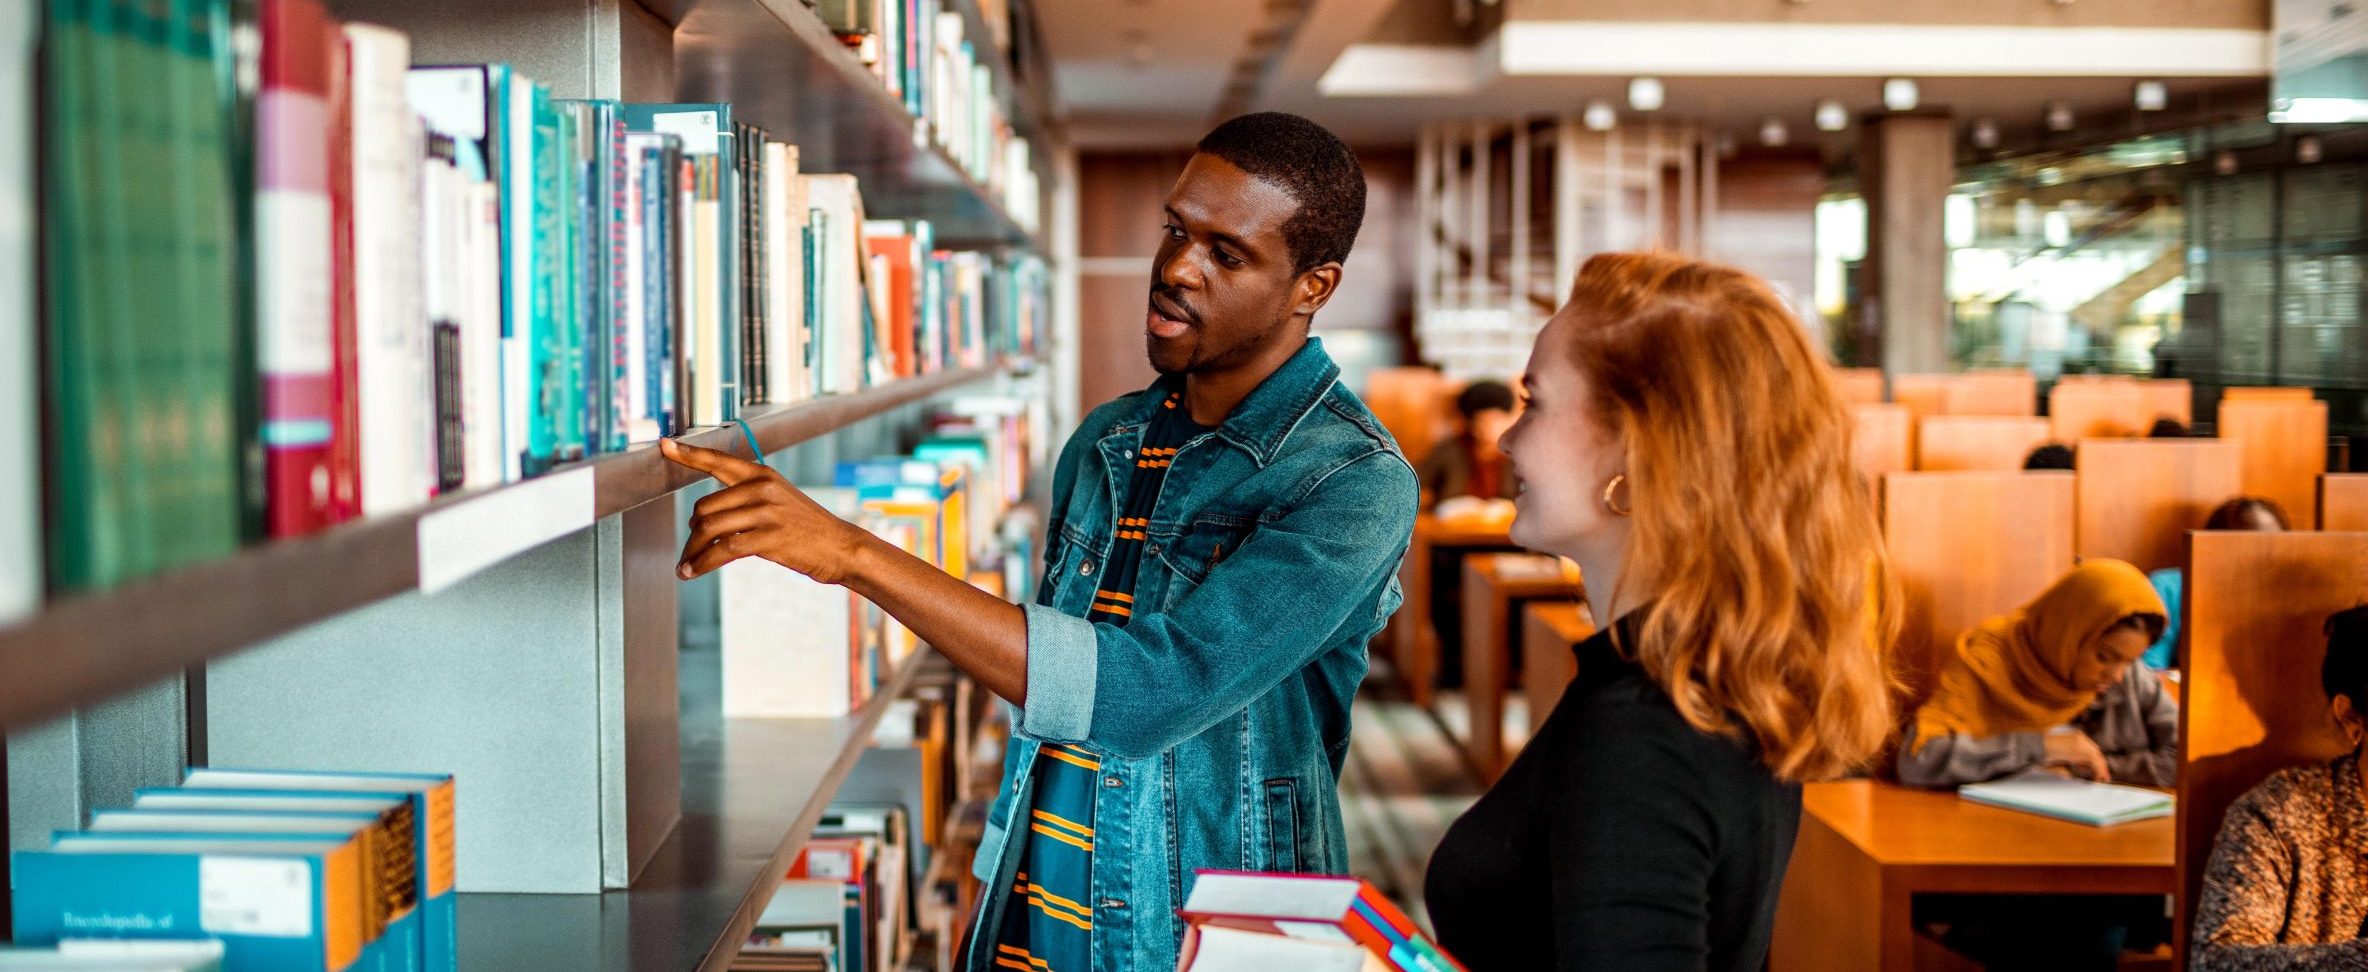 Two college students search for books in the library, while other students study in the background.